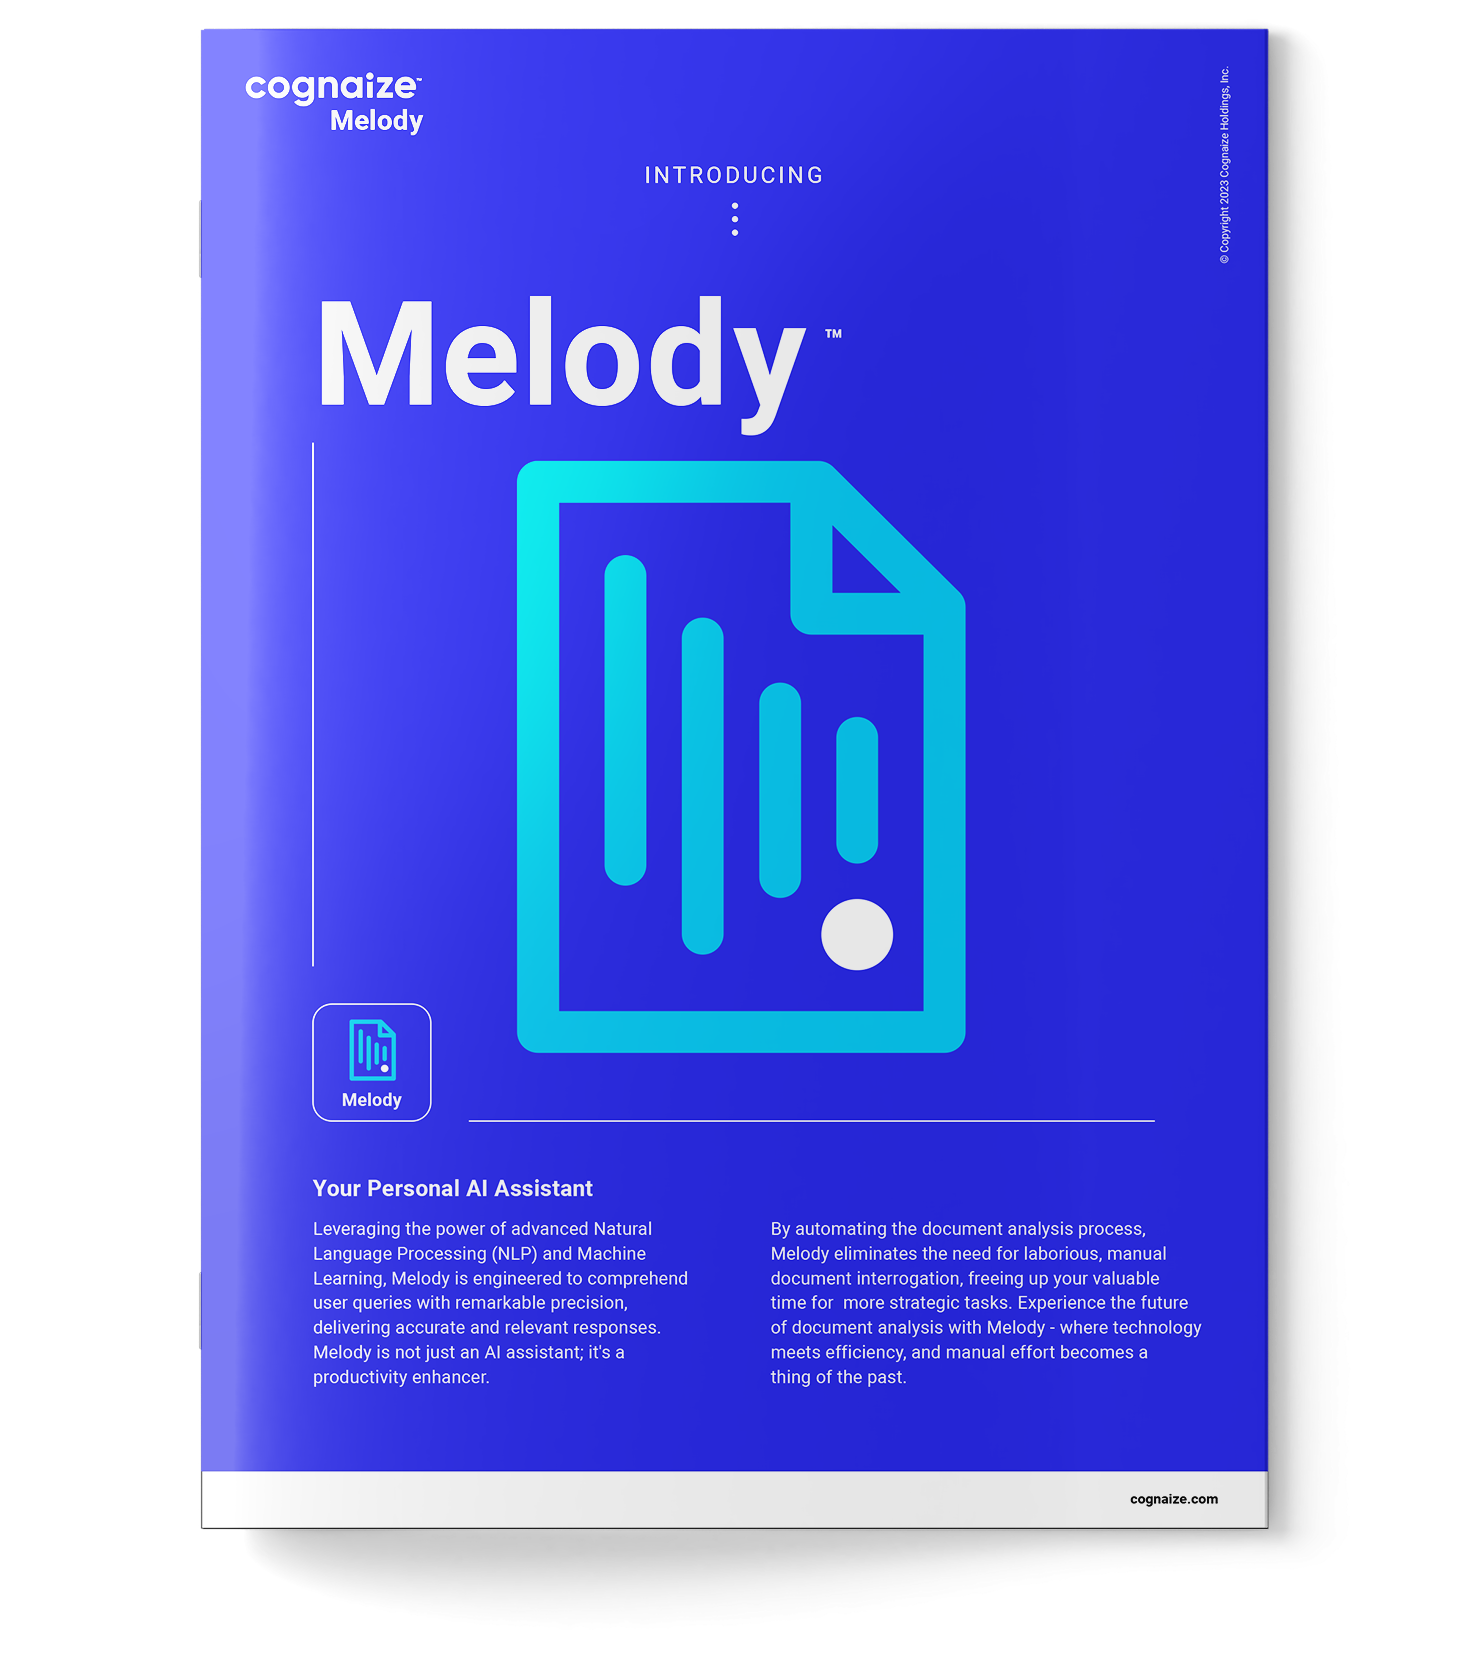 melody-case-study-guide3